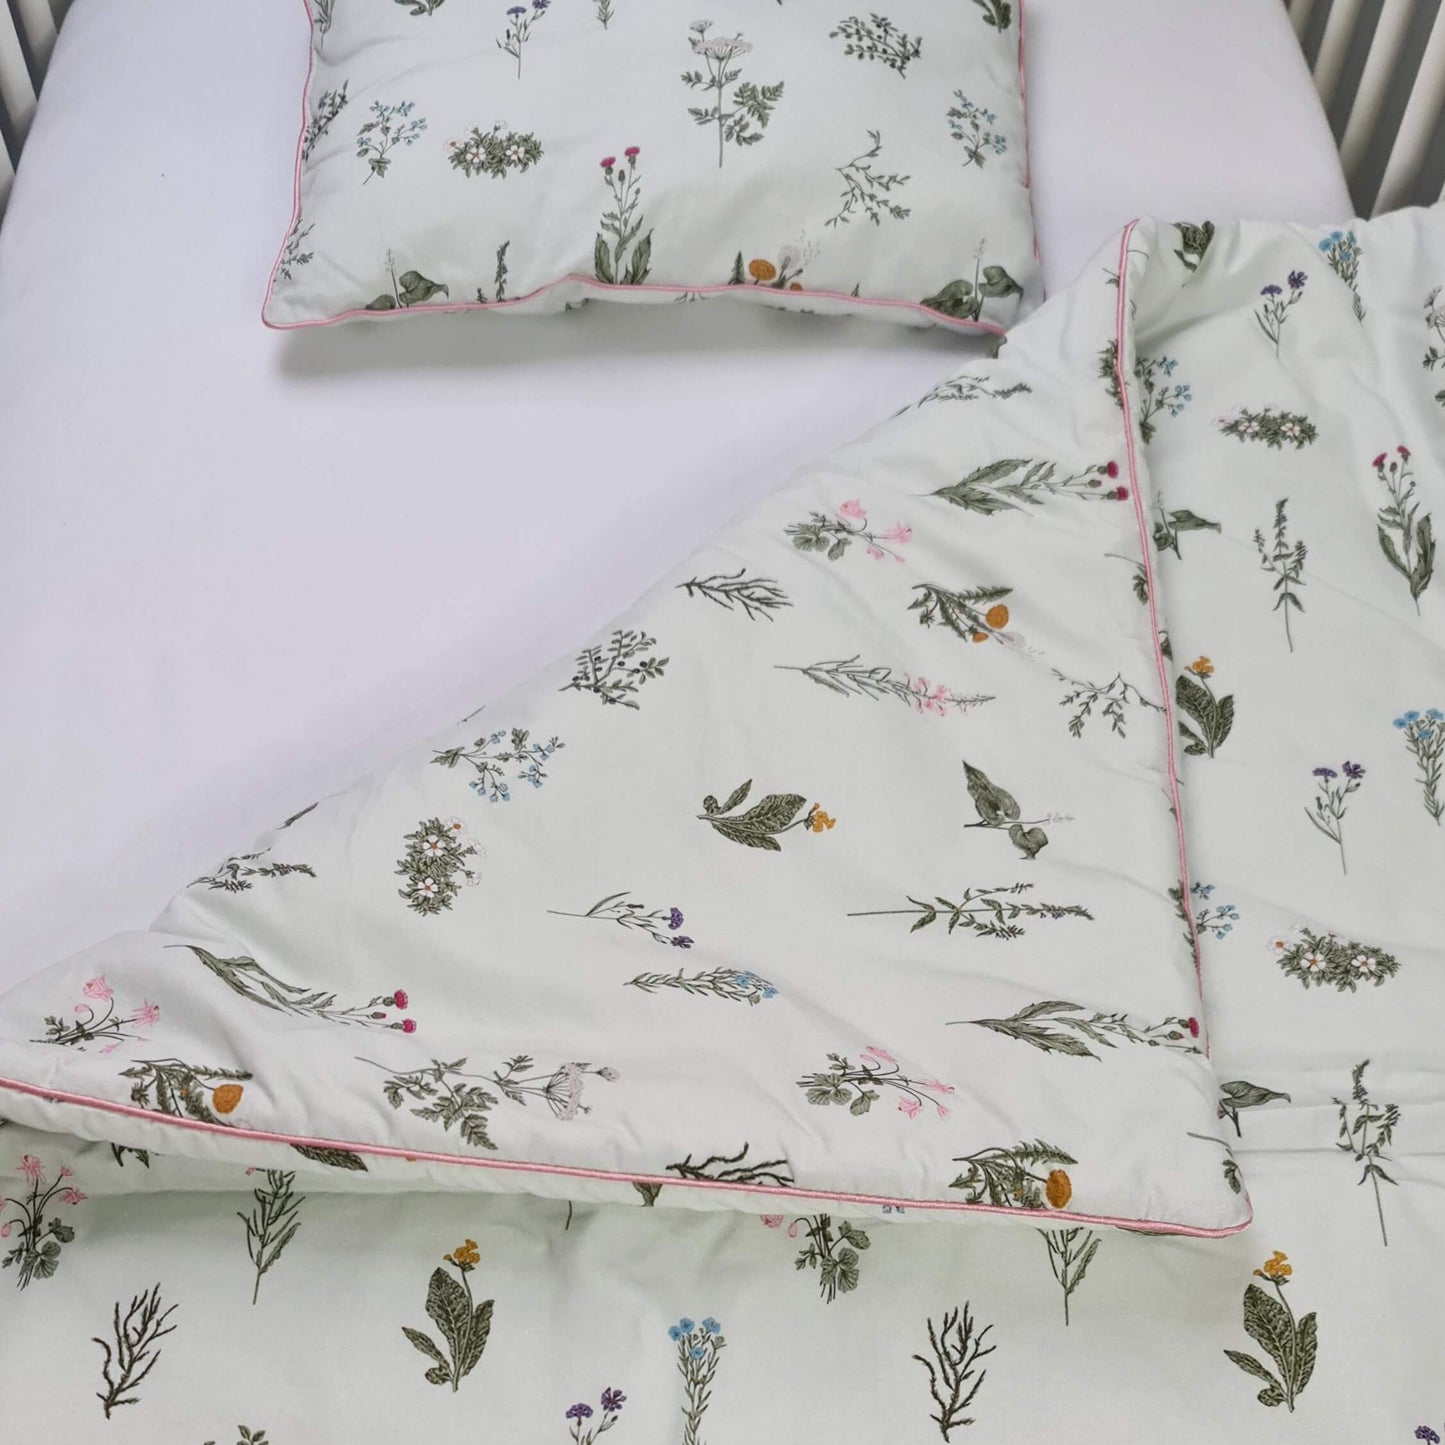 Duvet & pillow - all-in-one filling&cover- 'M' FLORAL